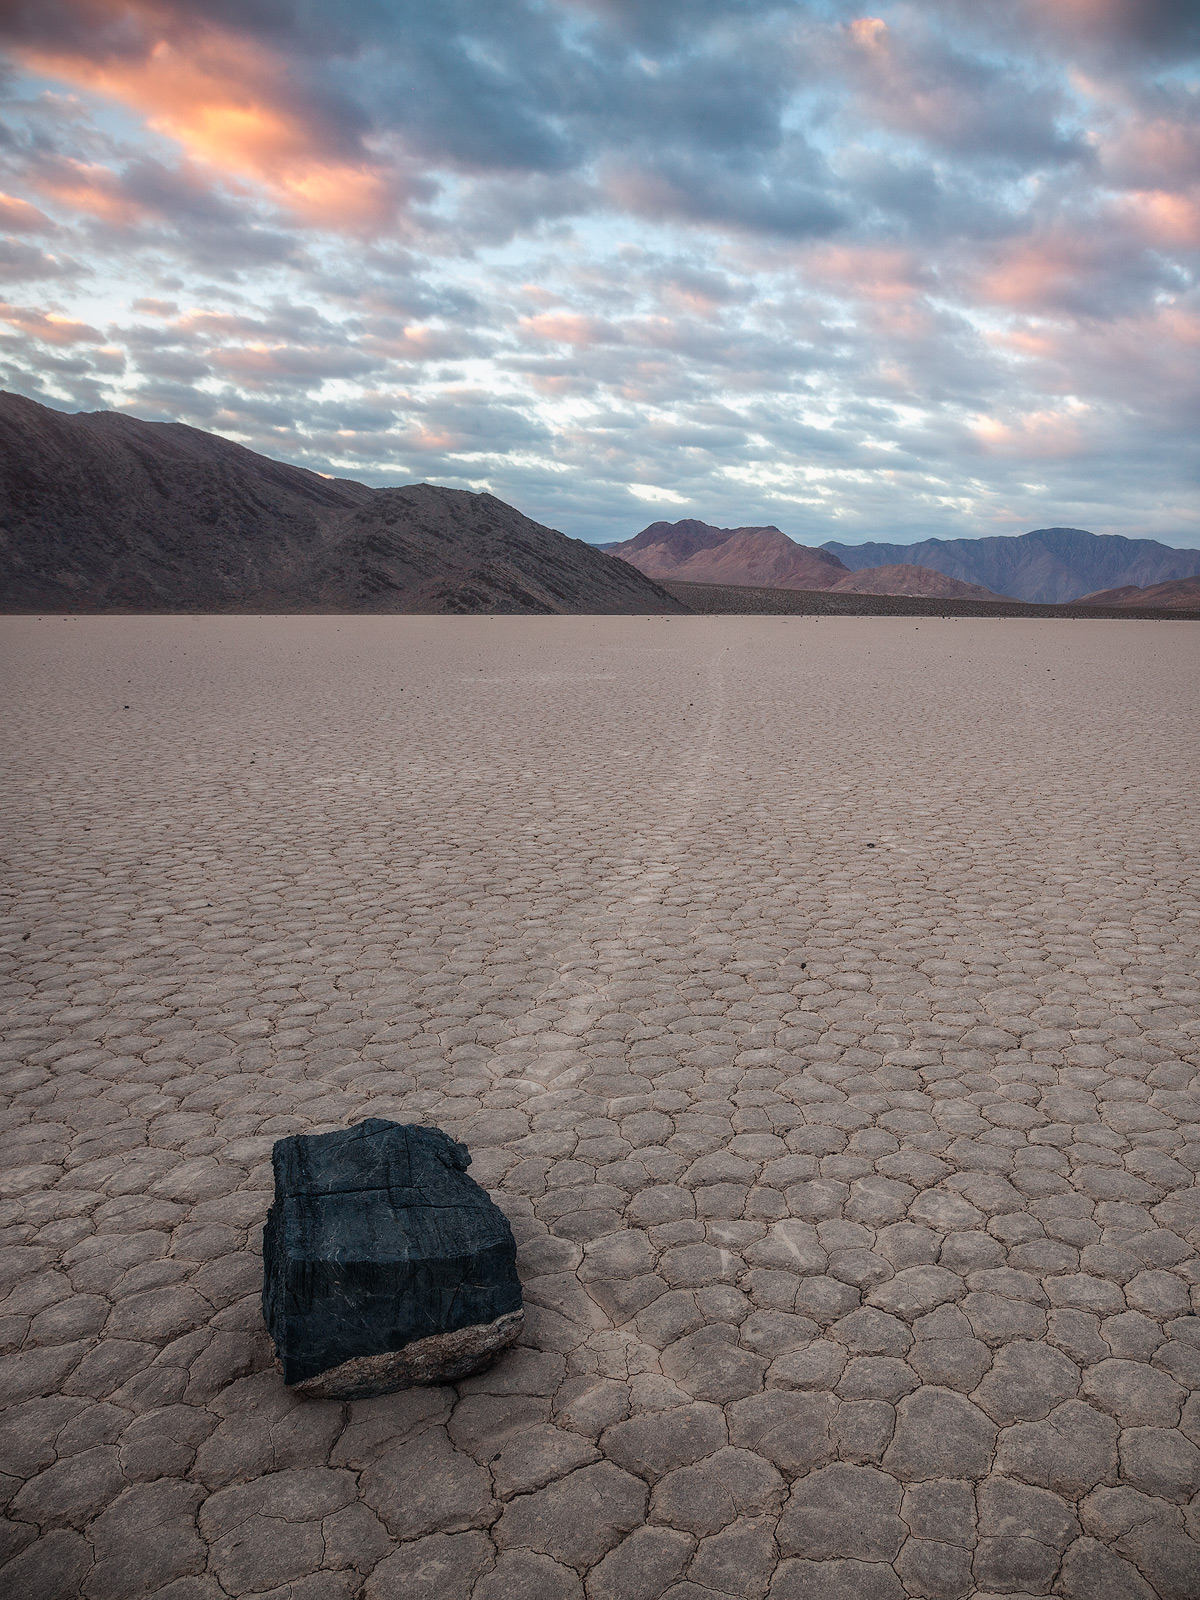 One of the many moving rocks at Death Valley's slow moving racetrack.